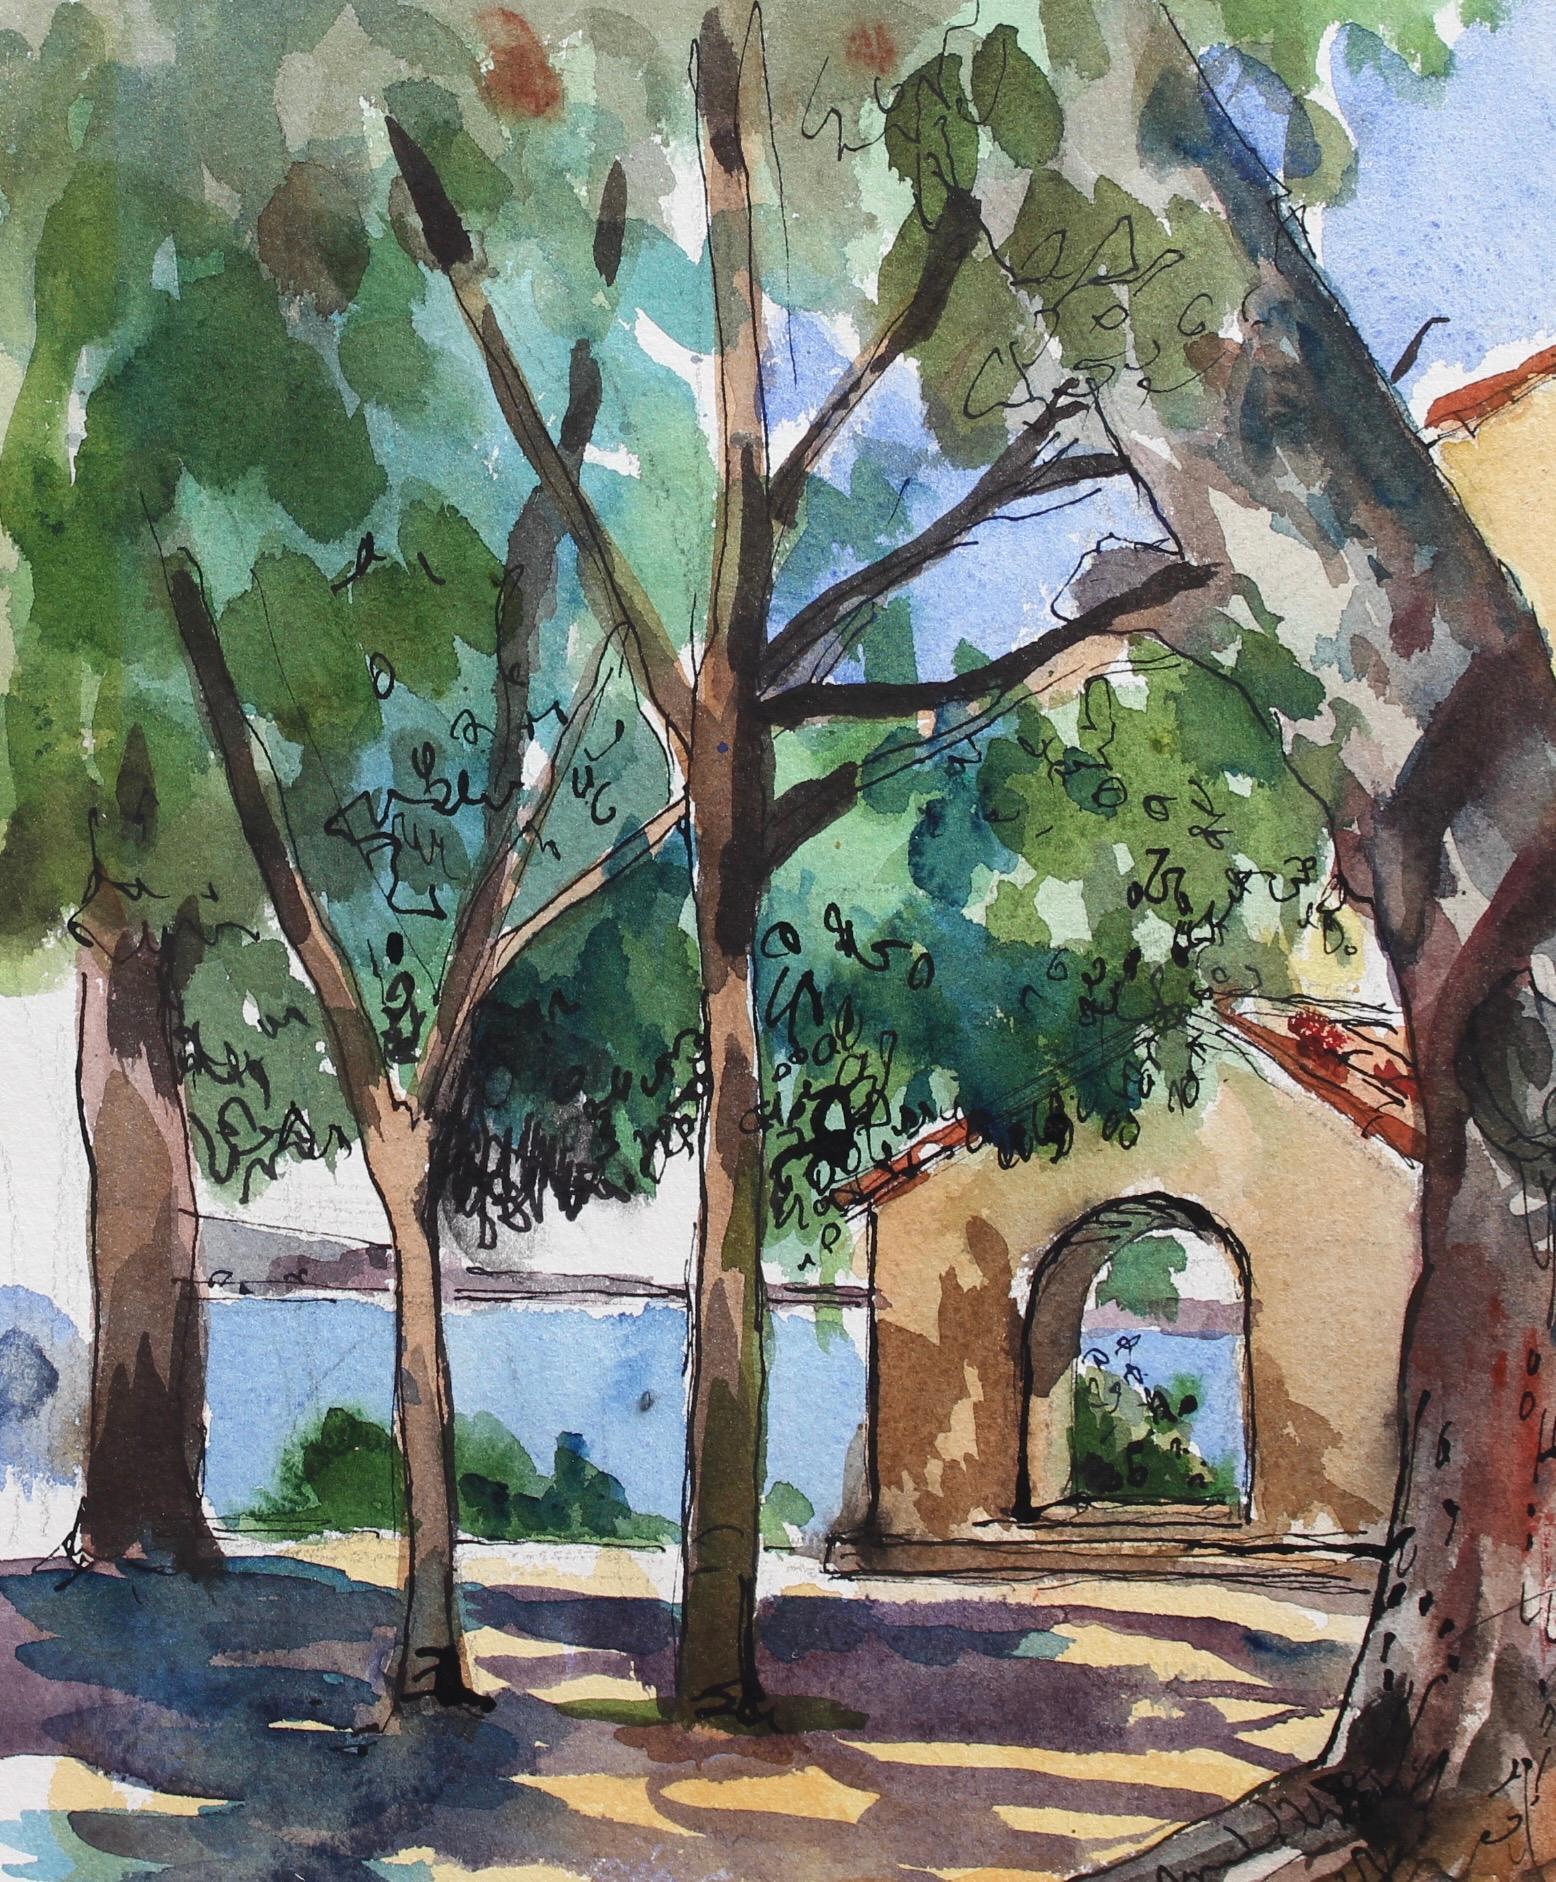 'The Garoupe Sanctuary, Antibes, France', watercolour and ink on paper, by Robert Dyens (1994). The artist depicts an iconic site of cultural importance at Cap d’Antibes, the Sanctuary of La Garoupe at which the Chapelle de La Garoupe is located, is